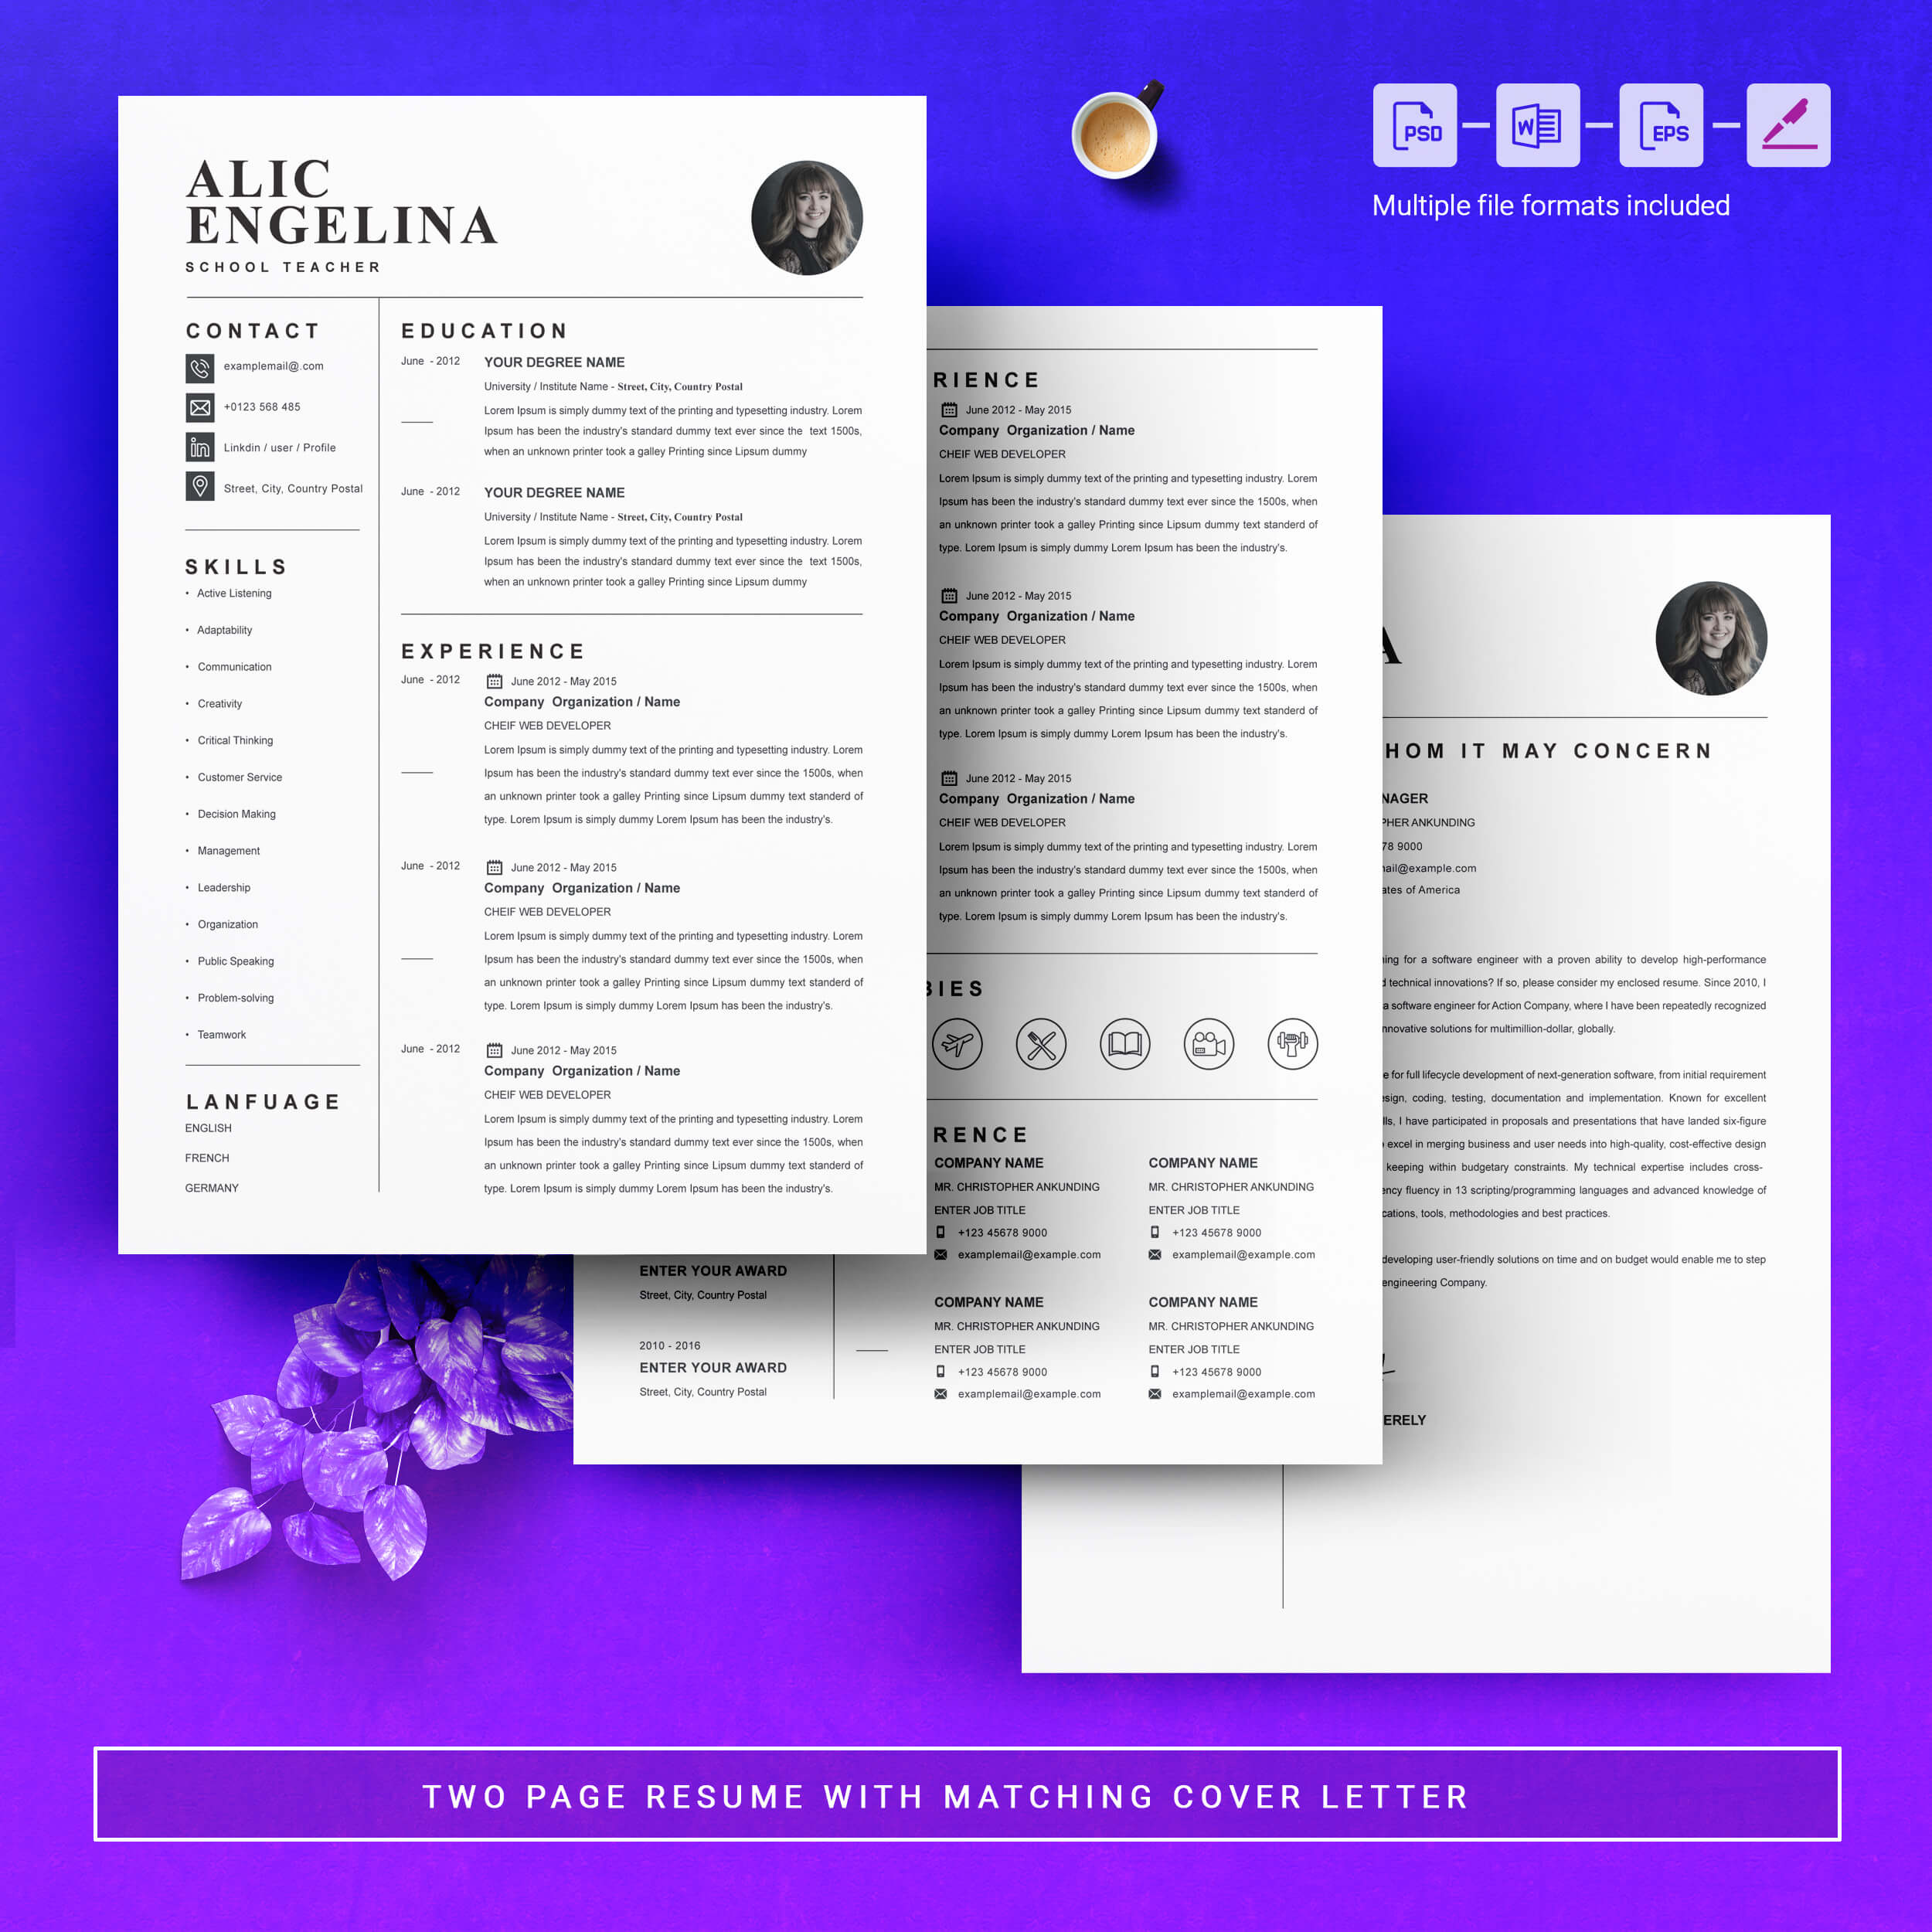 04 3 pages free resume design template 1 965